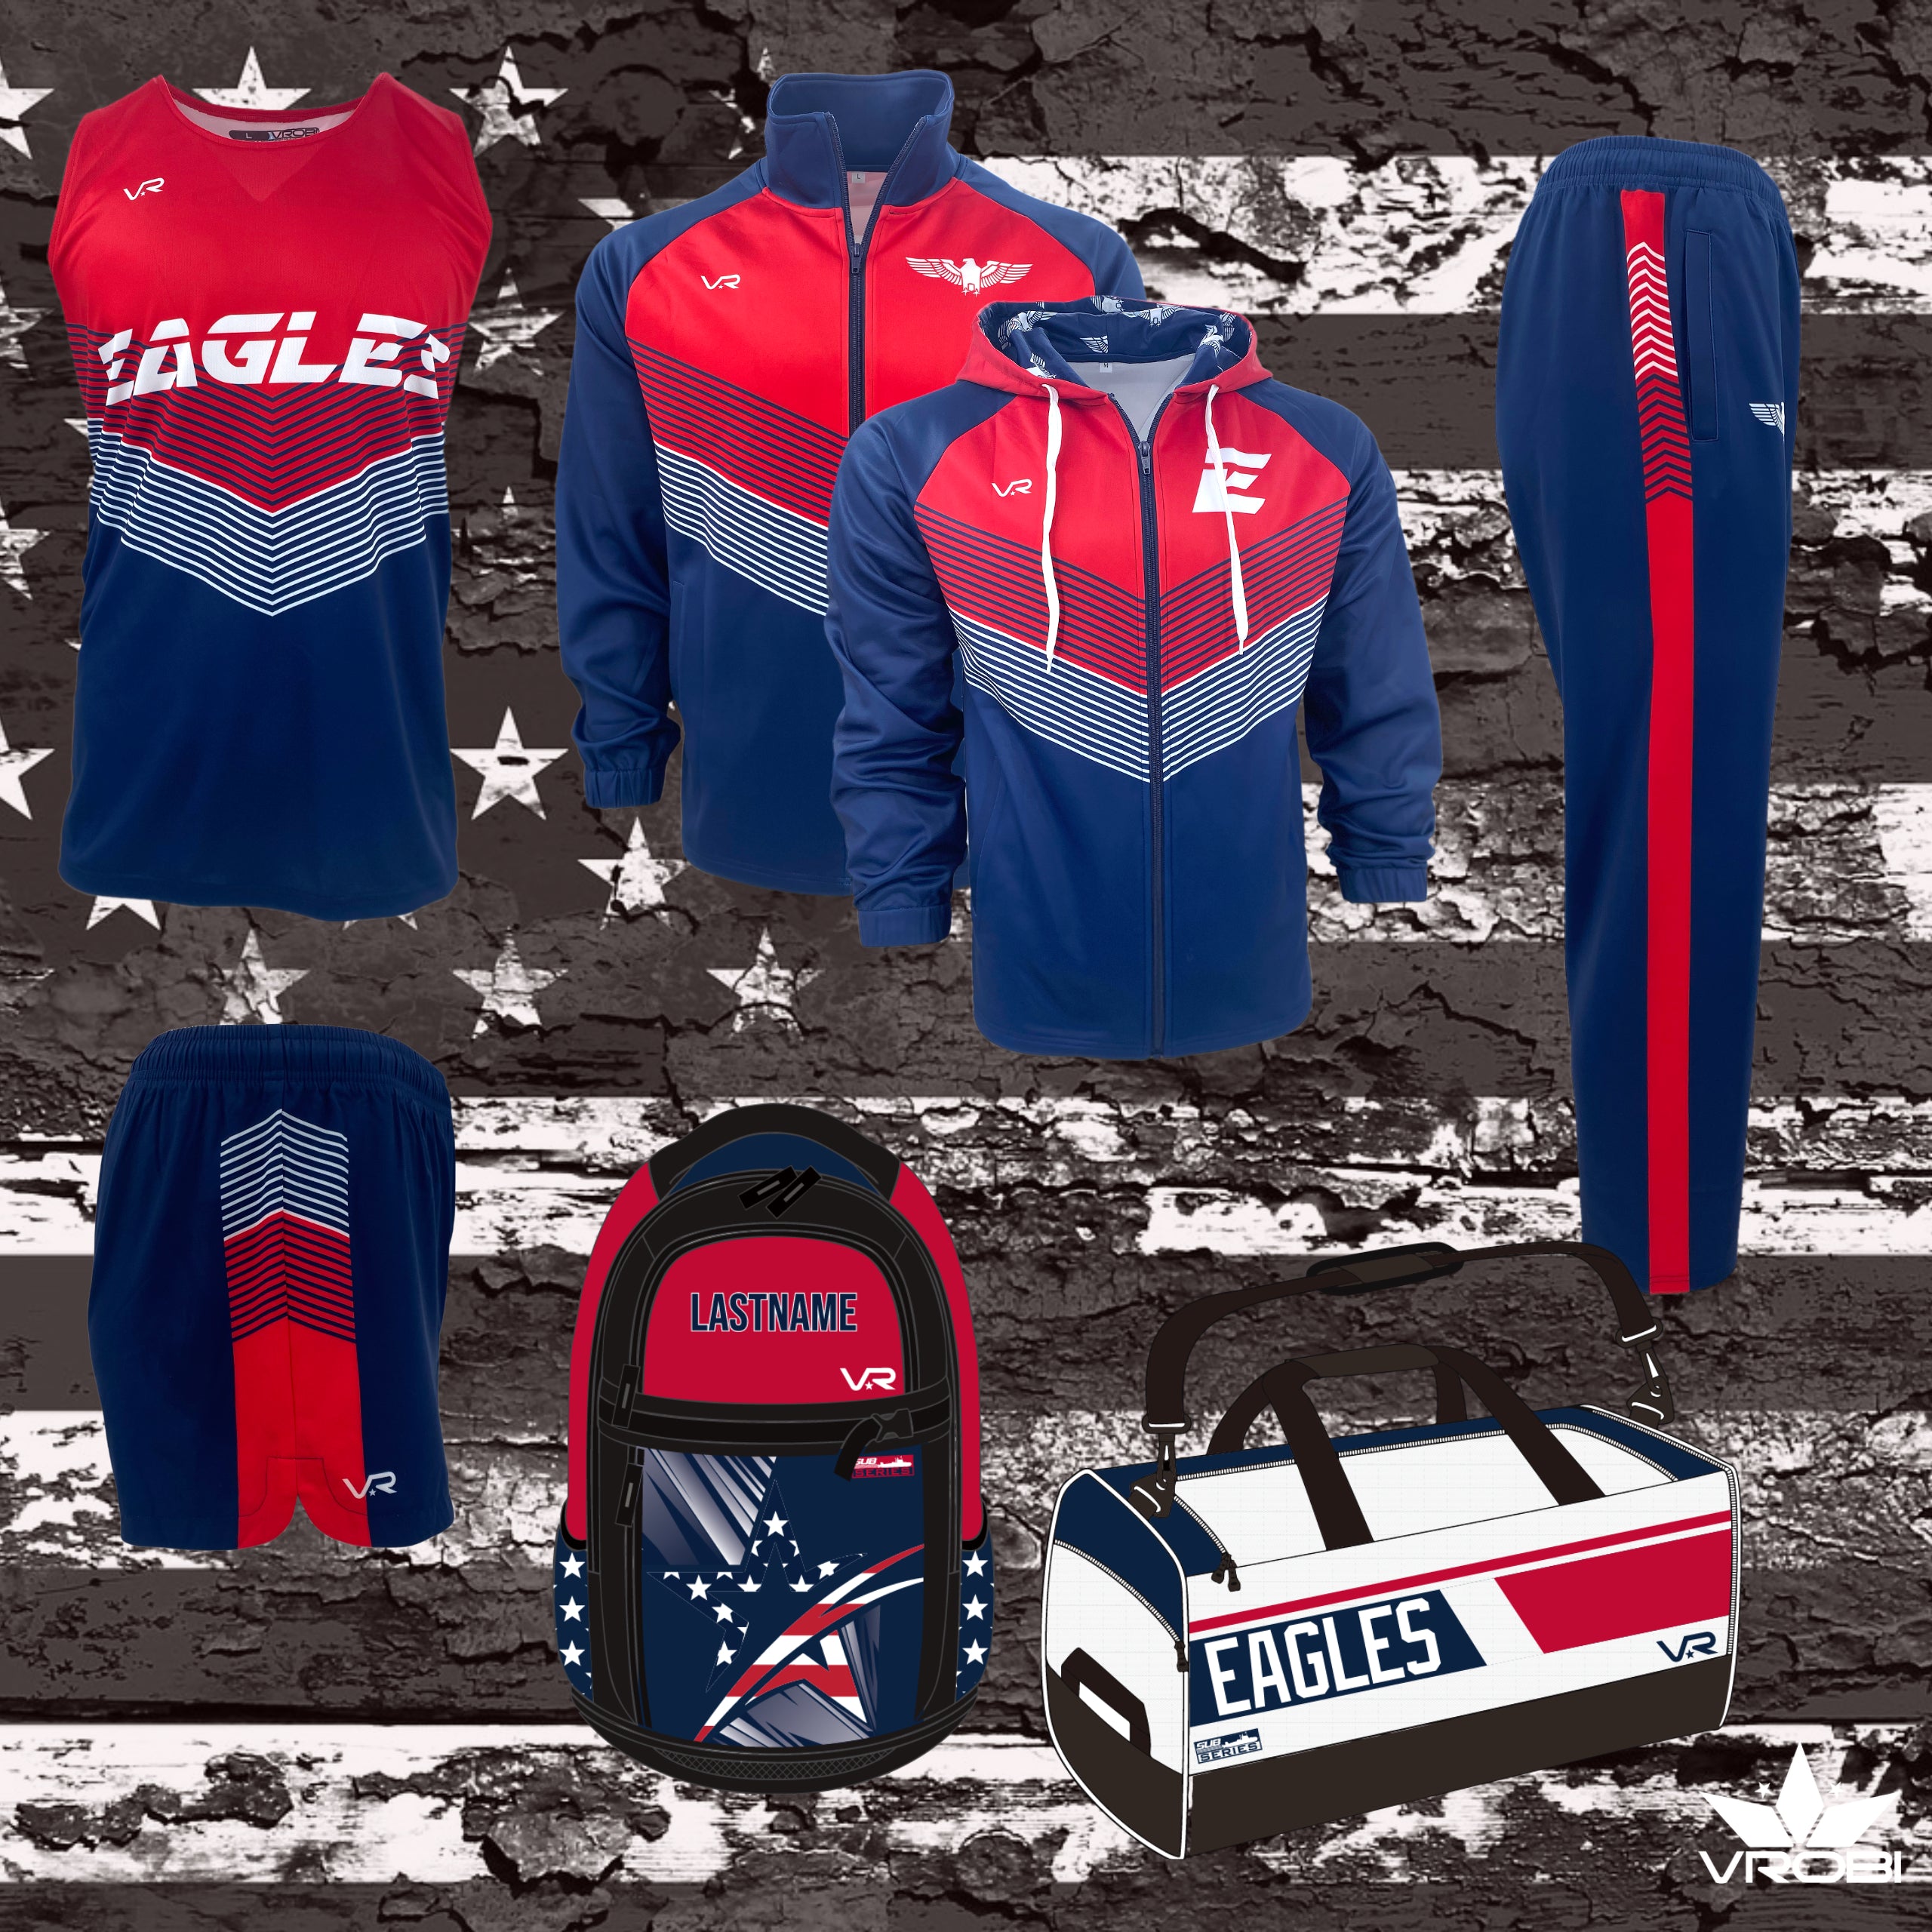 Track Platinum Package featuring Jerseys, Shorts, Warmups and Custom Backpack or Duffle Bag